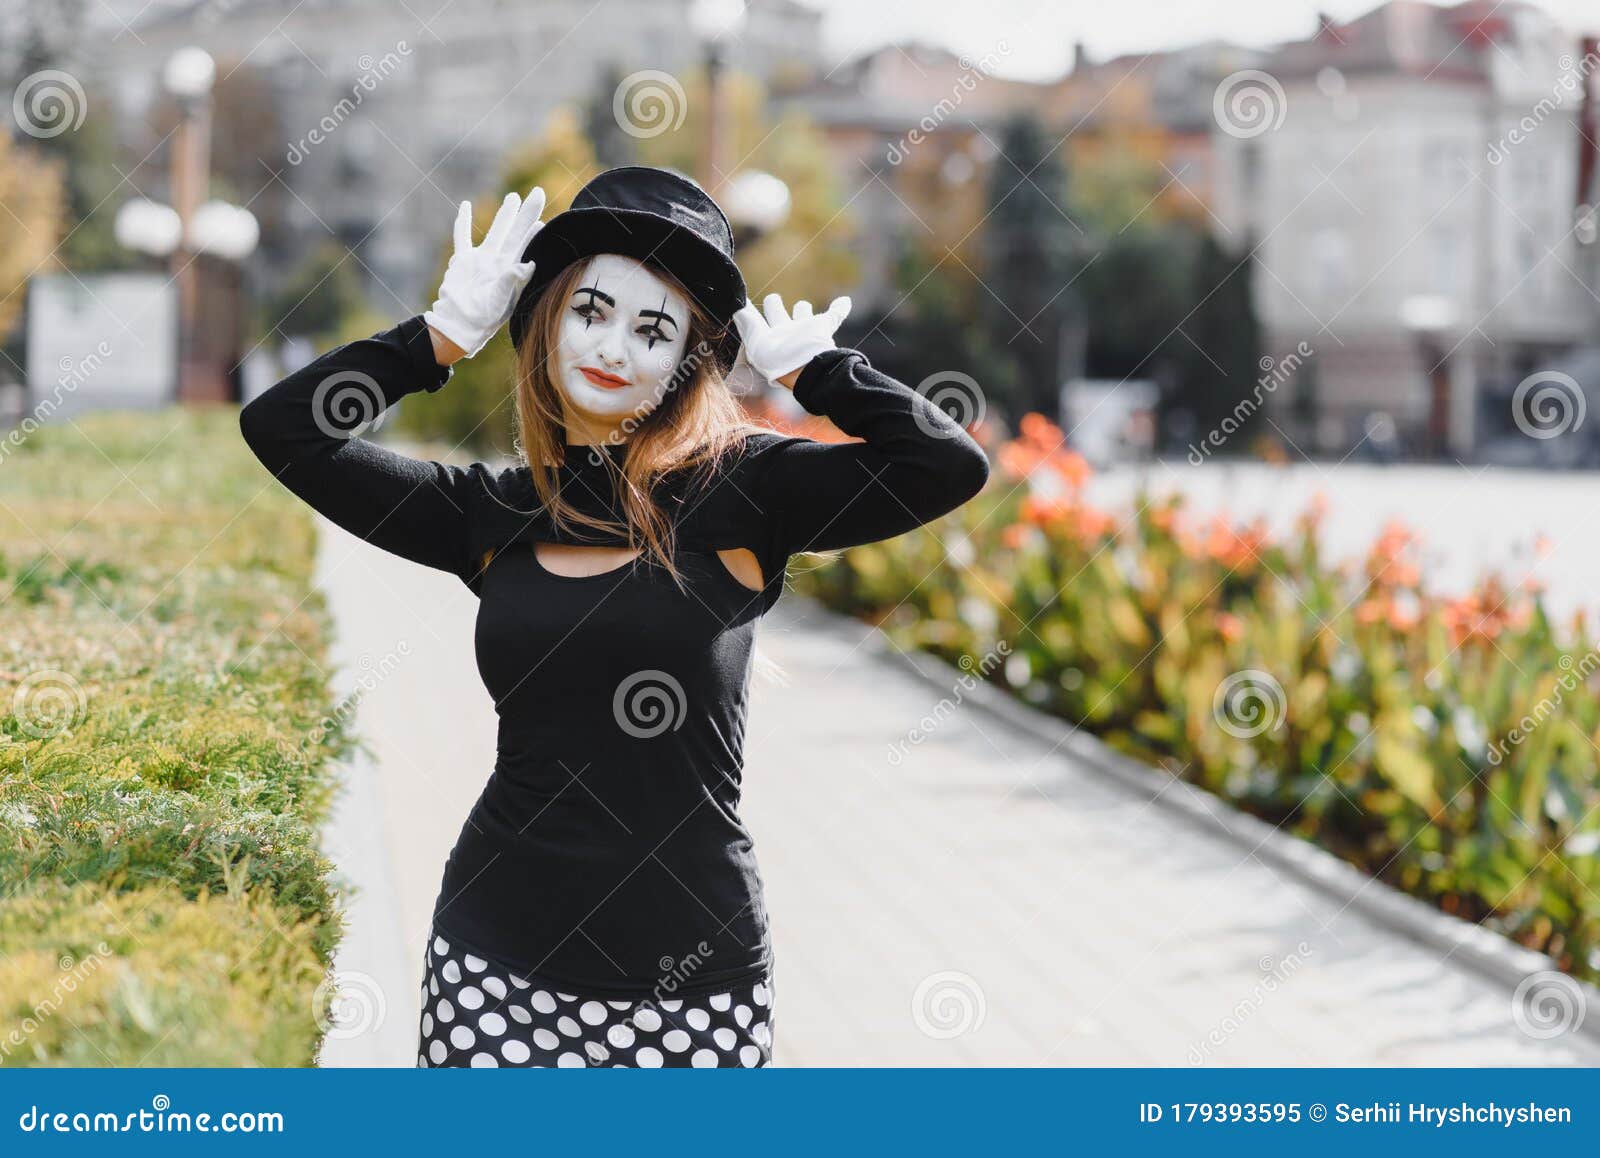 The Girl with Makeup of the Mime. Improvisation. Mime Different Emotions Stock Image - Image of emotion, brunette: